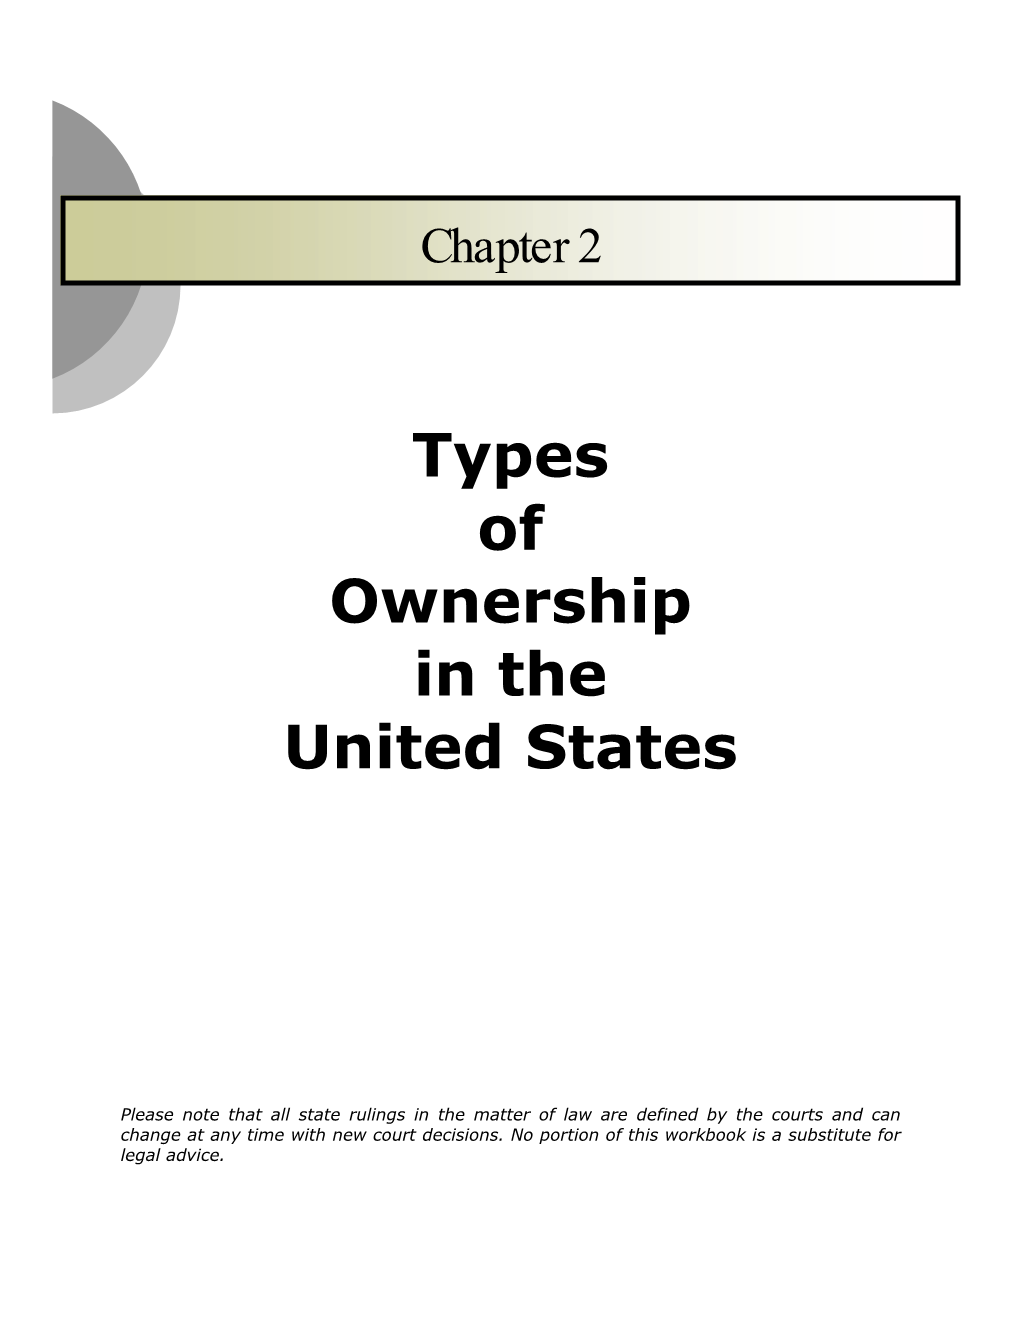 Types of Ownership in the United States